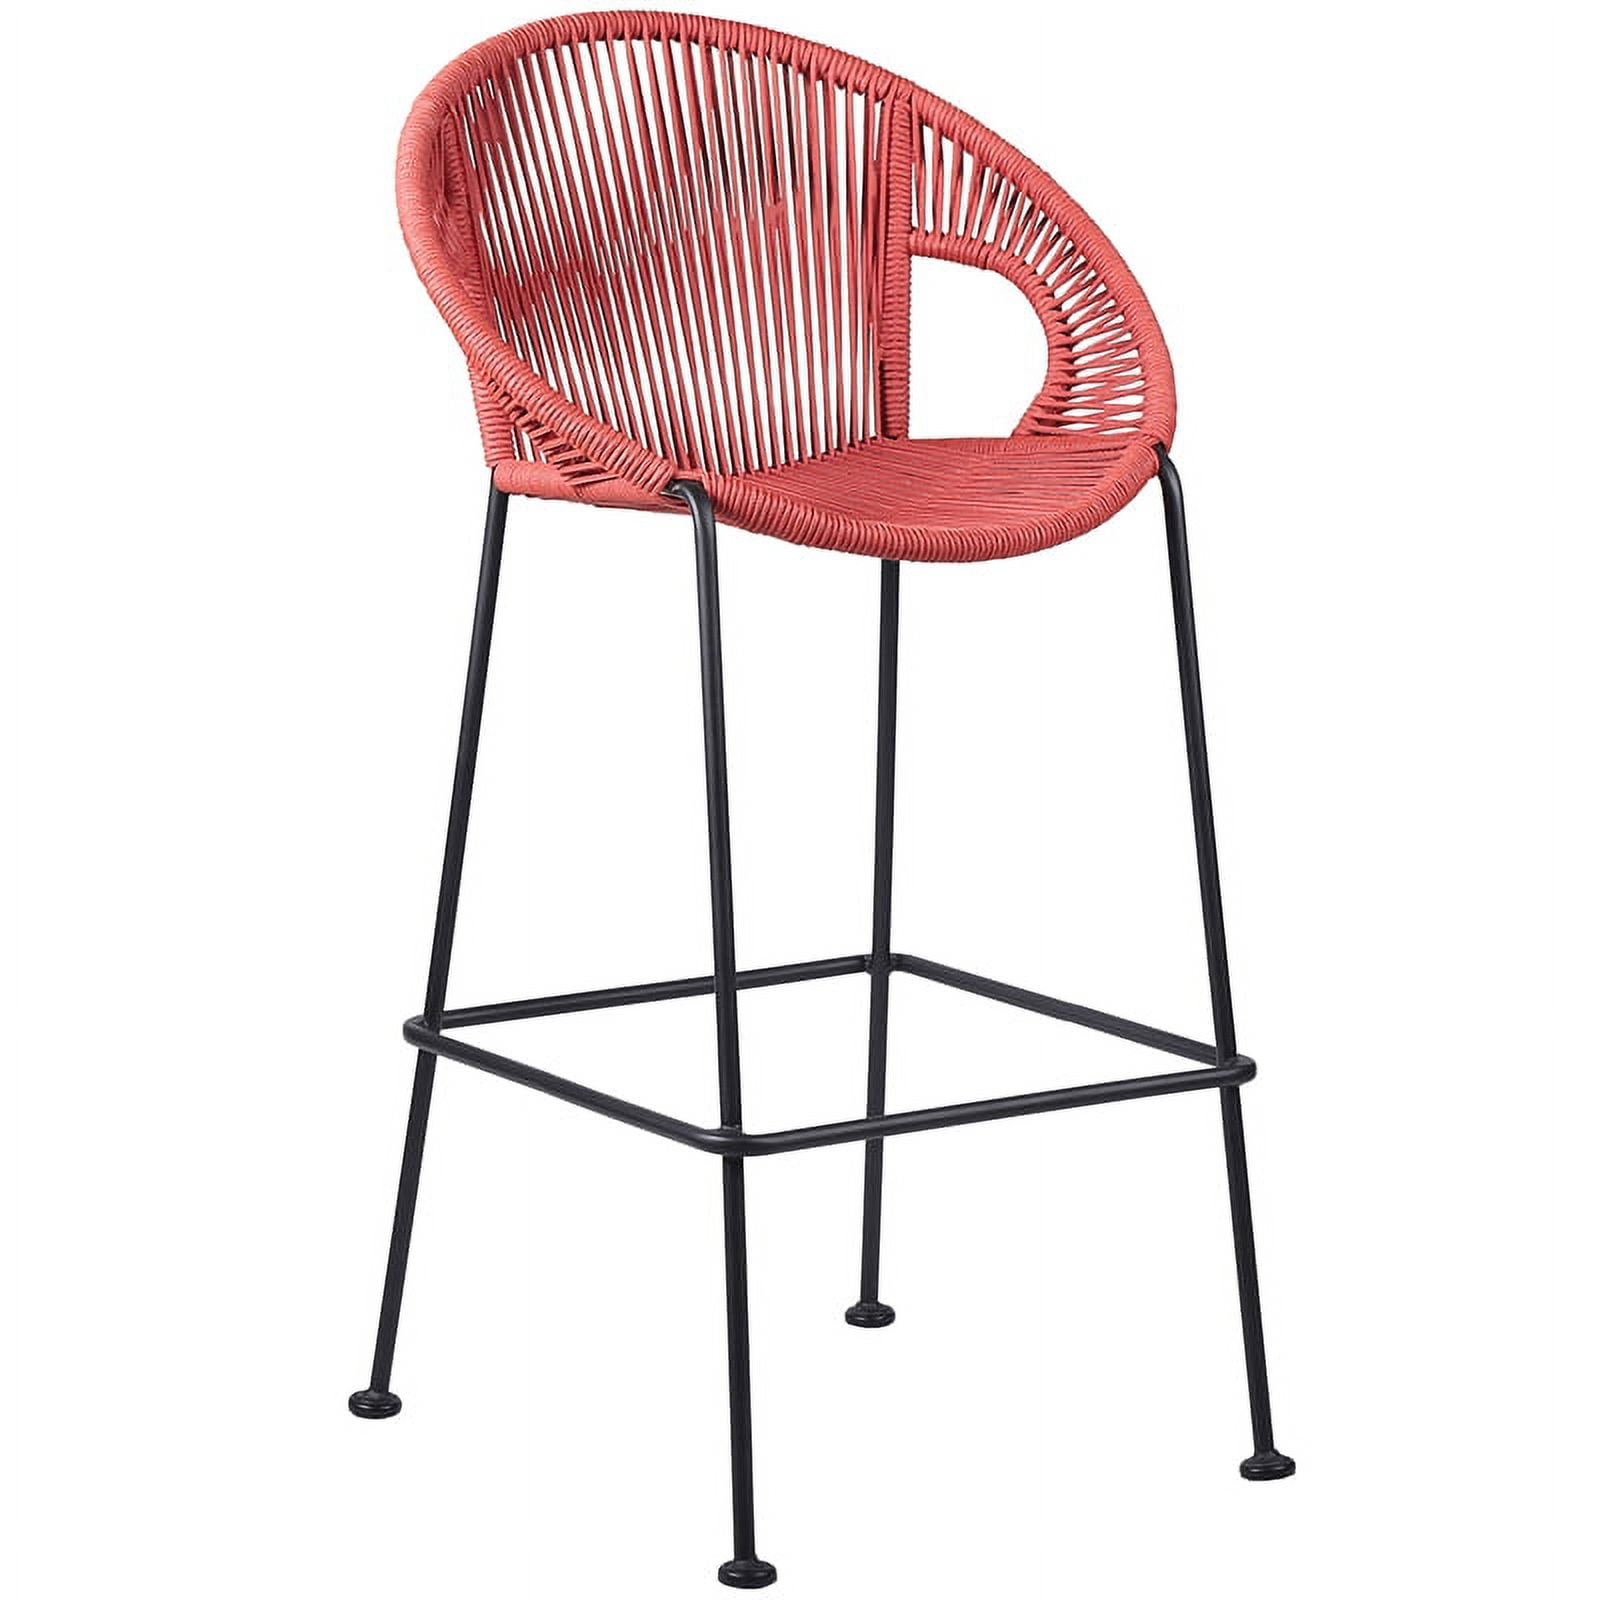 Picture of Armen Living LCACBABRK30 30 in. Acapulco Indoor Outdoor Steel Bar Stool with Brick Red Rope